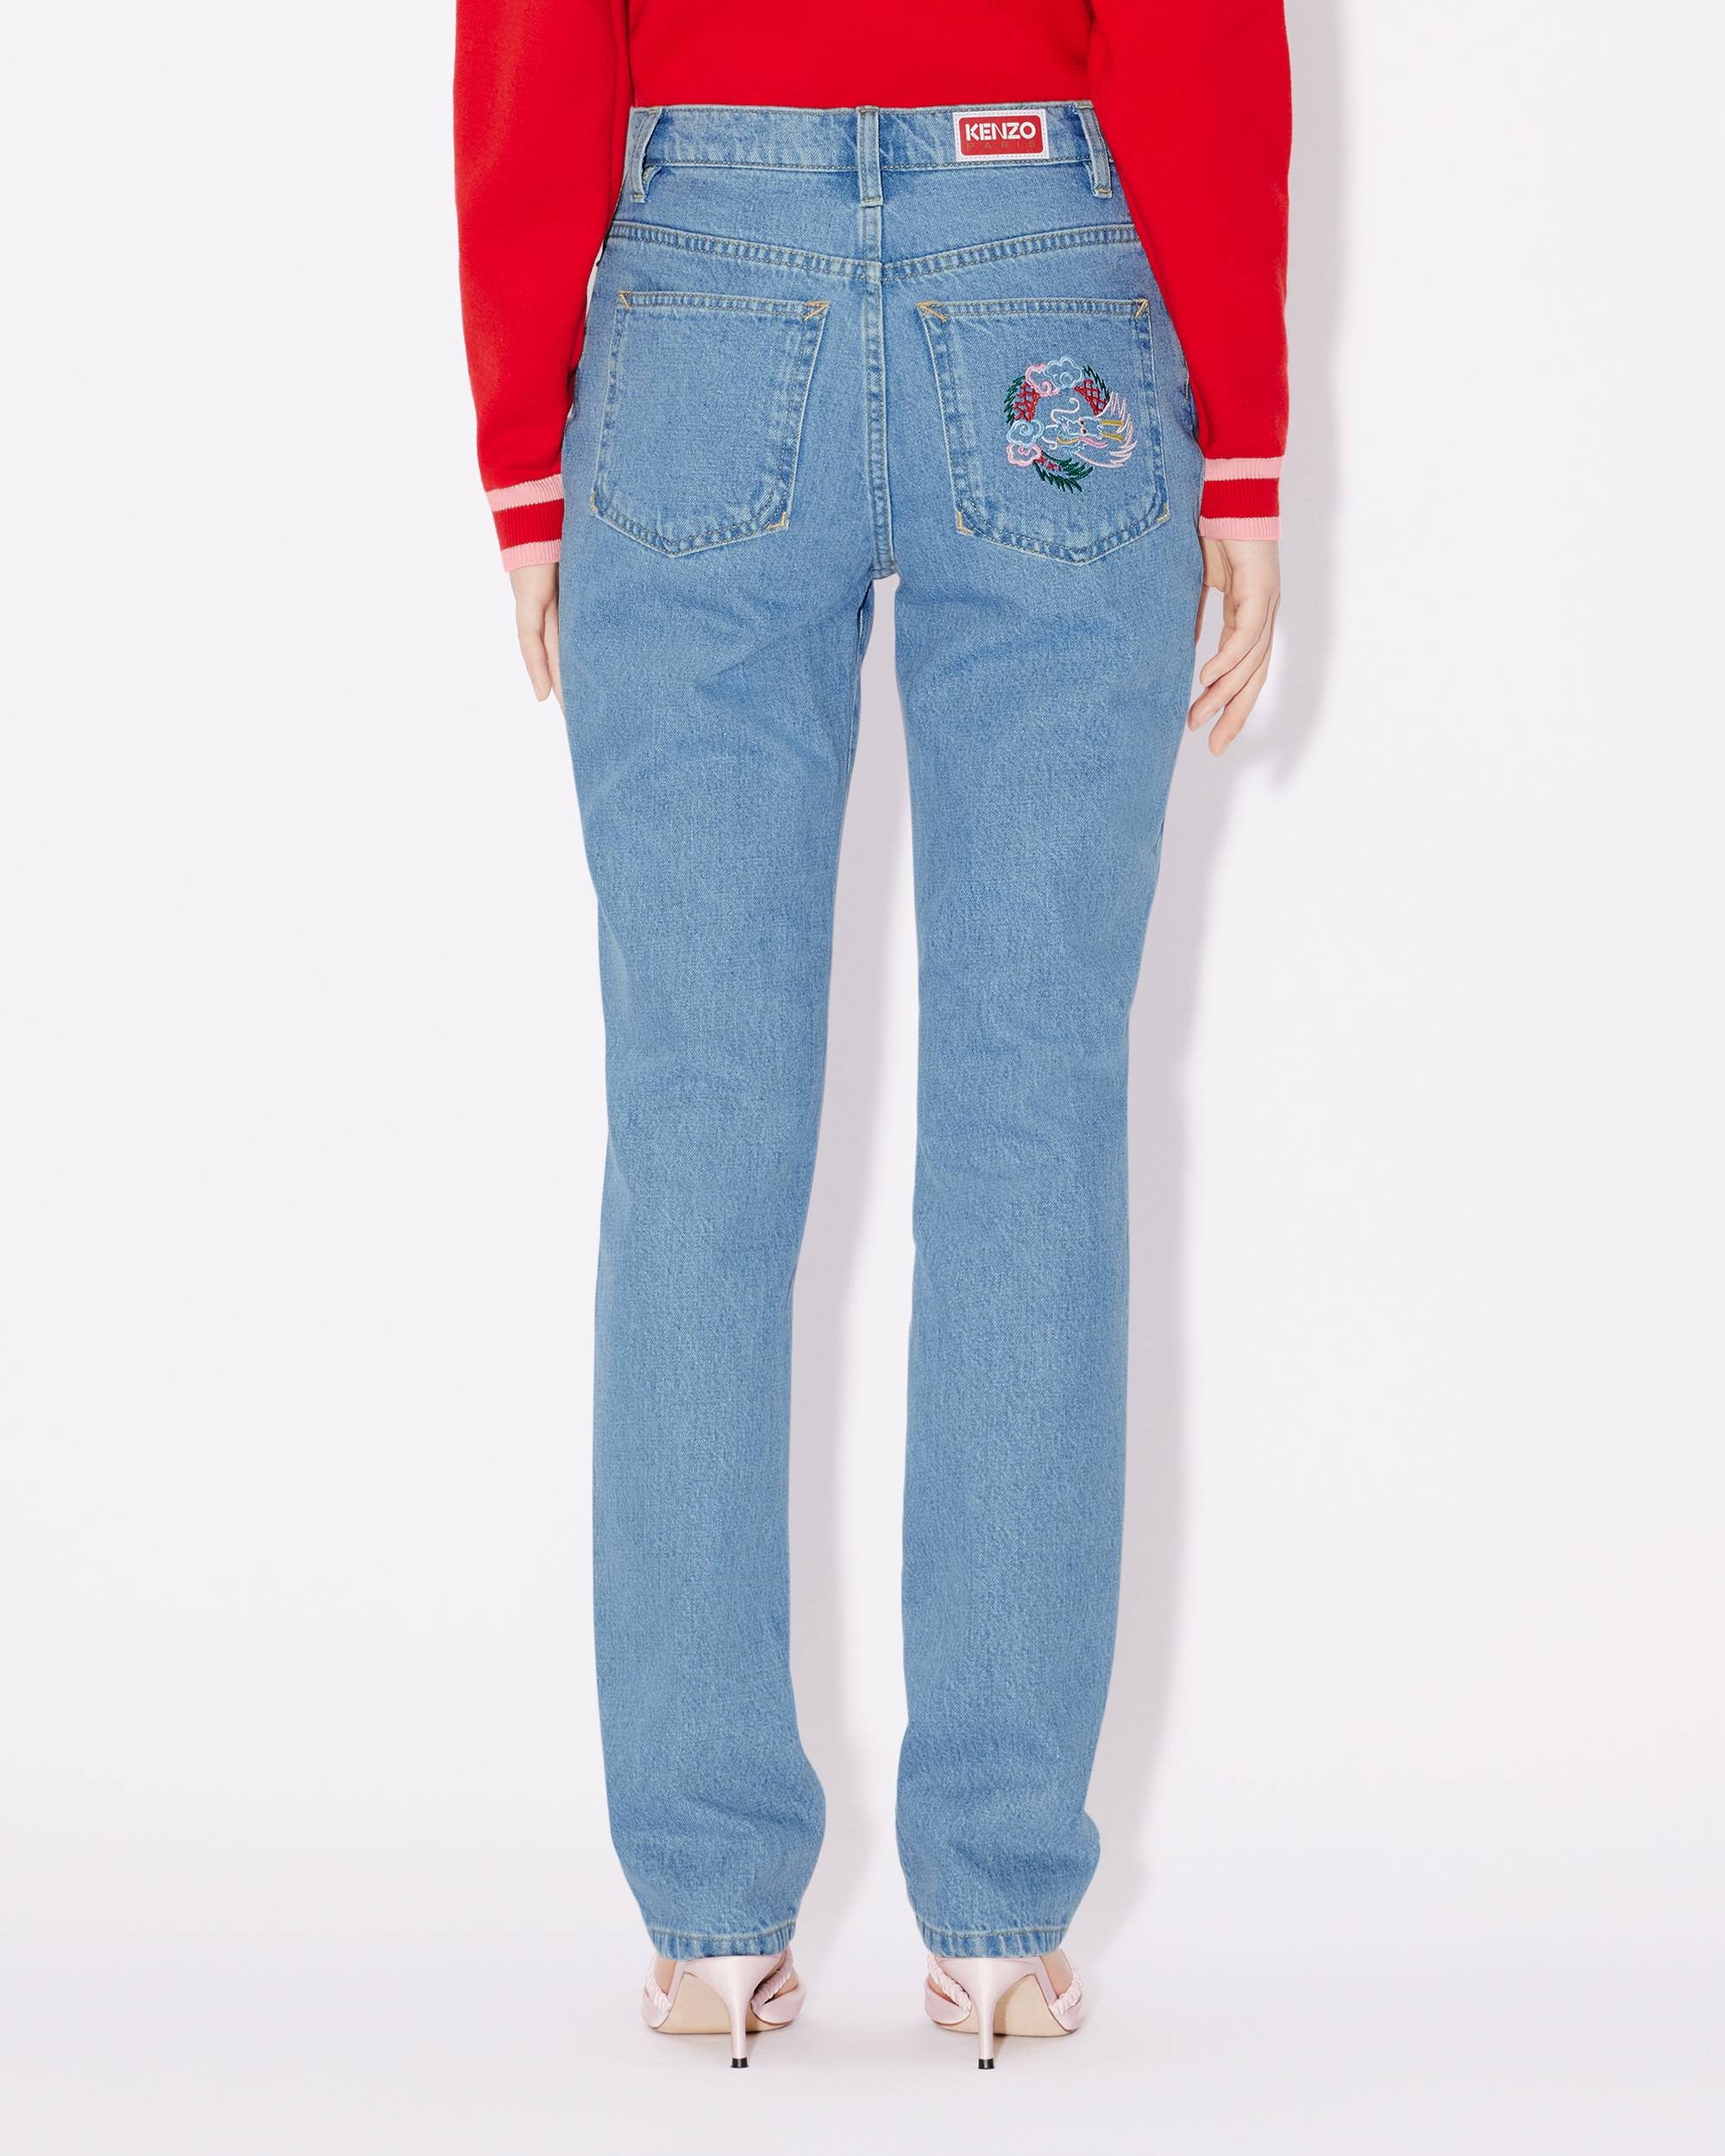 'Year of the Dragon' cropped embroidered ASAGAO jeans - 5